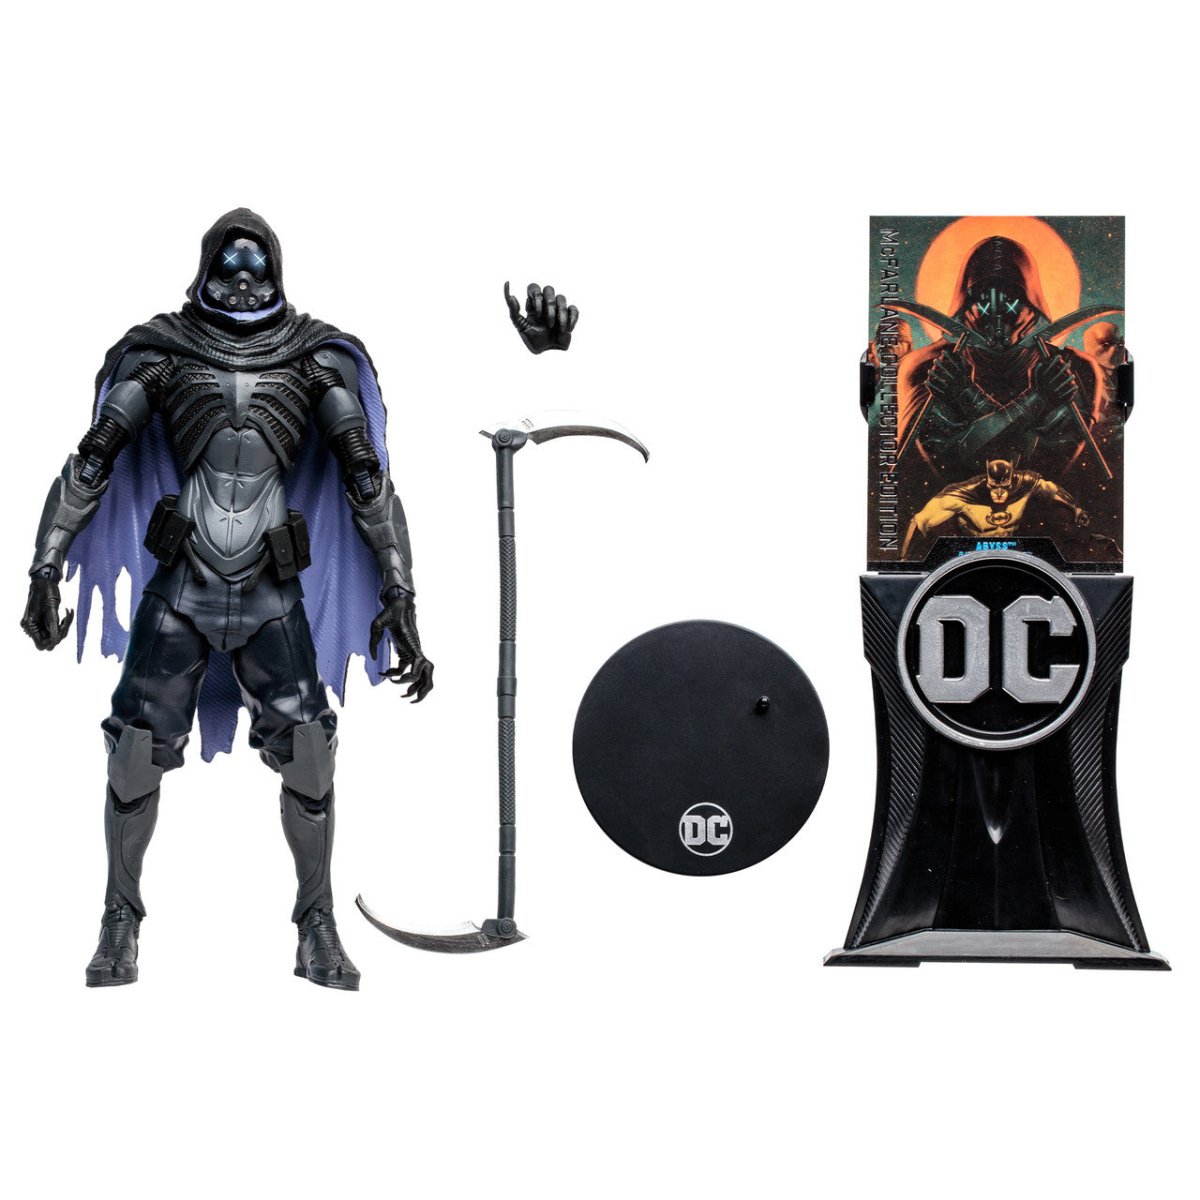 Abyss (Batman vs Abyss) McFarlane Collector Edition 7" Action Figure Pop-O-Loco